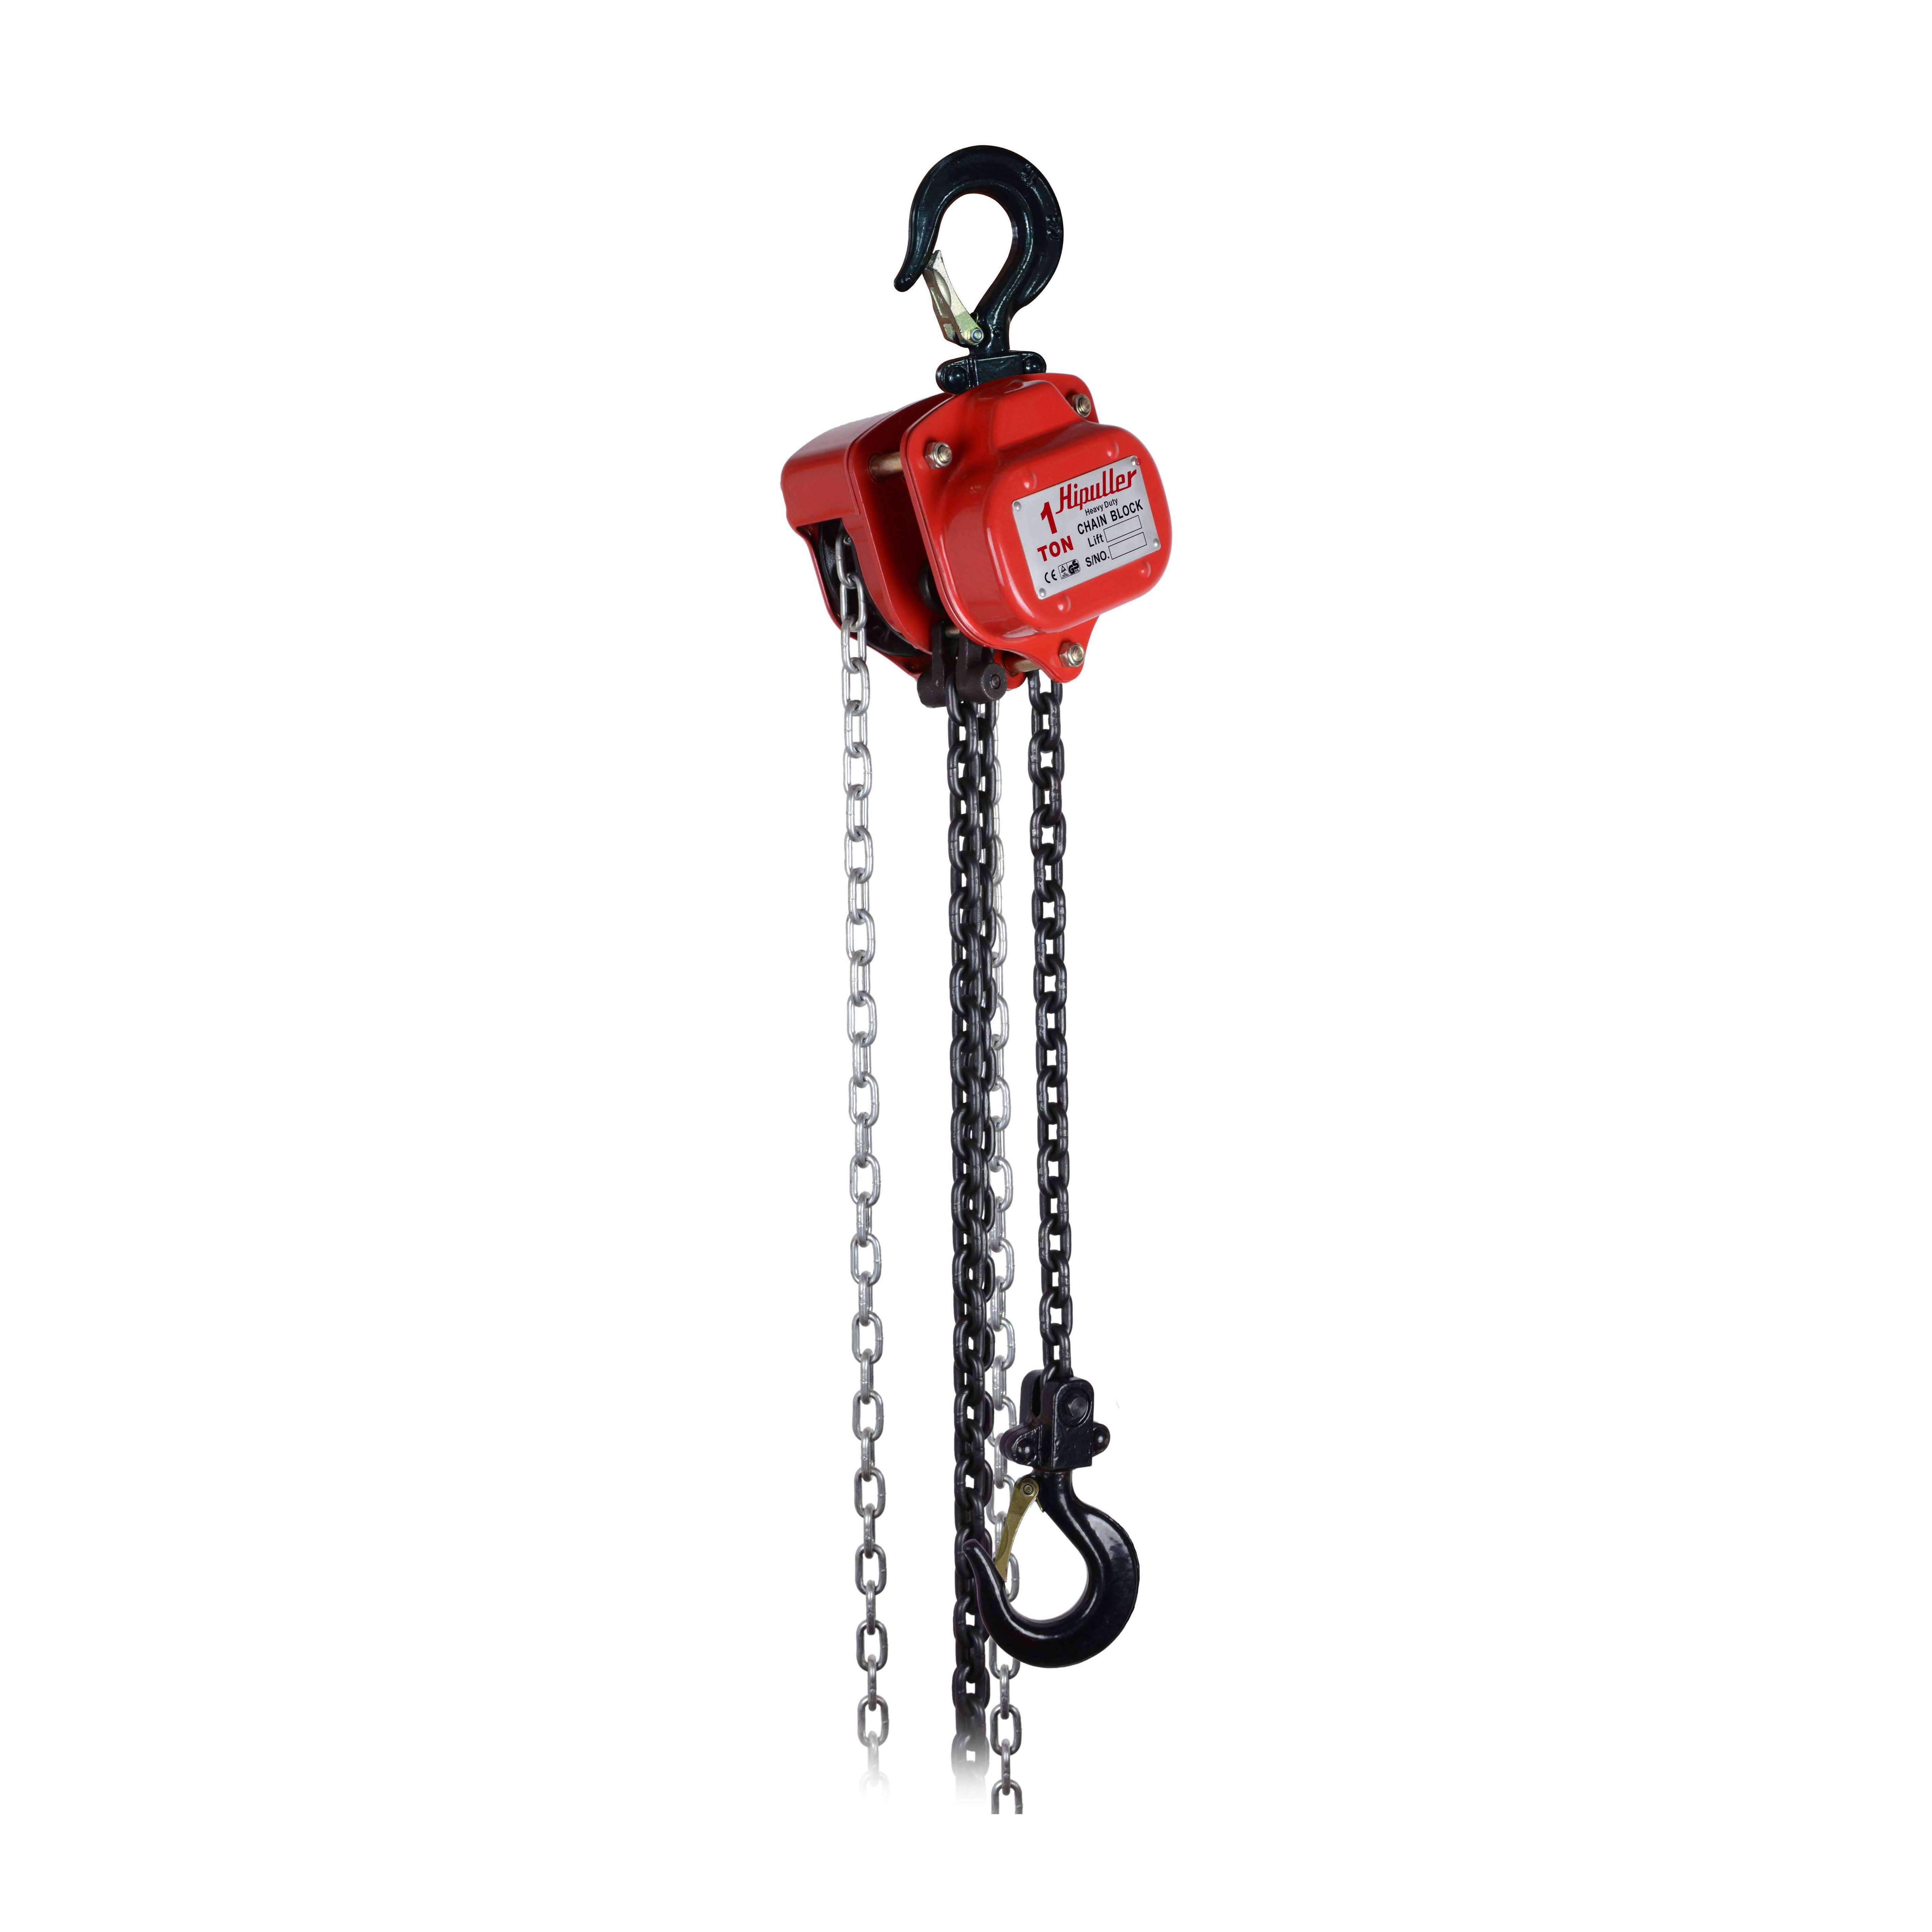 VC TYPE CHAIN HOIST Featured Image